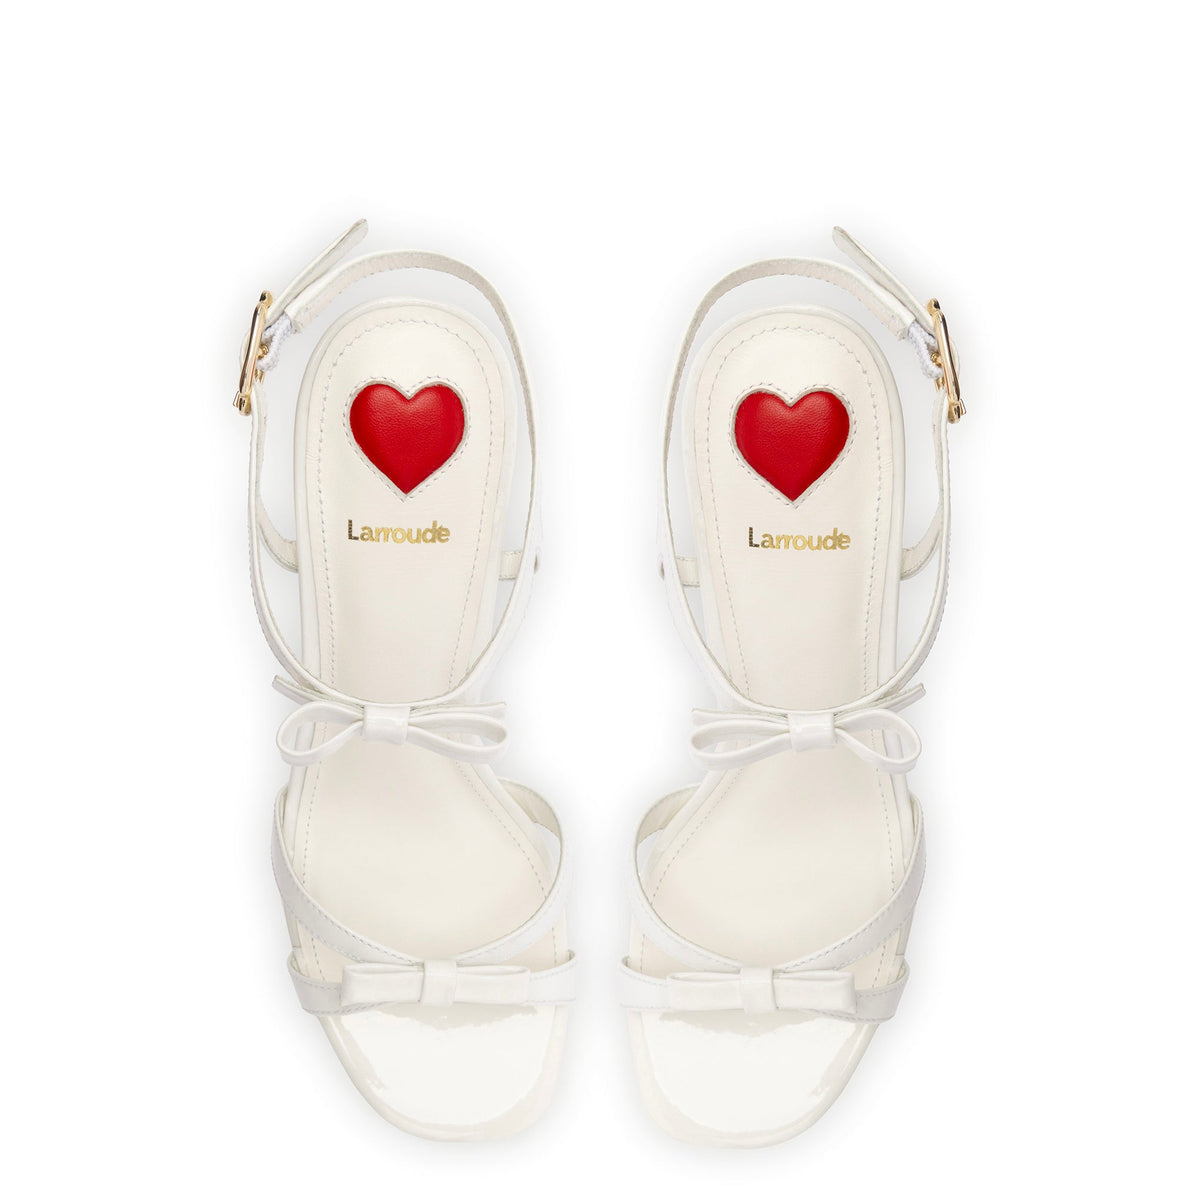 Brooks Sandal In White Patent Leather